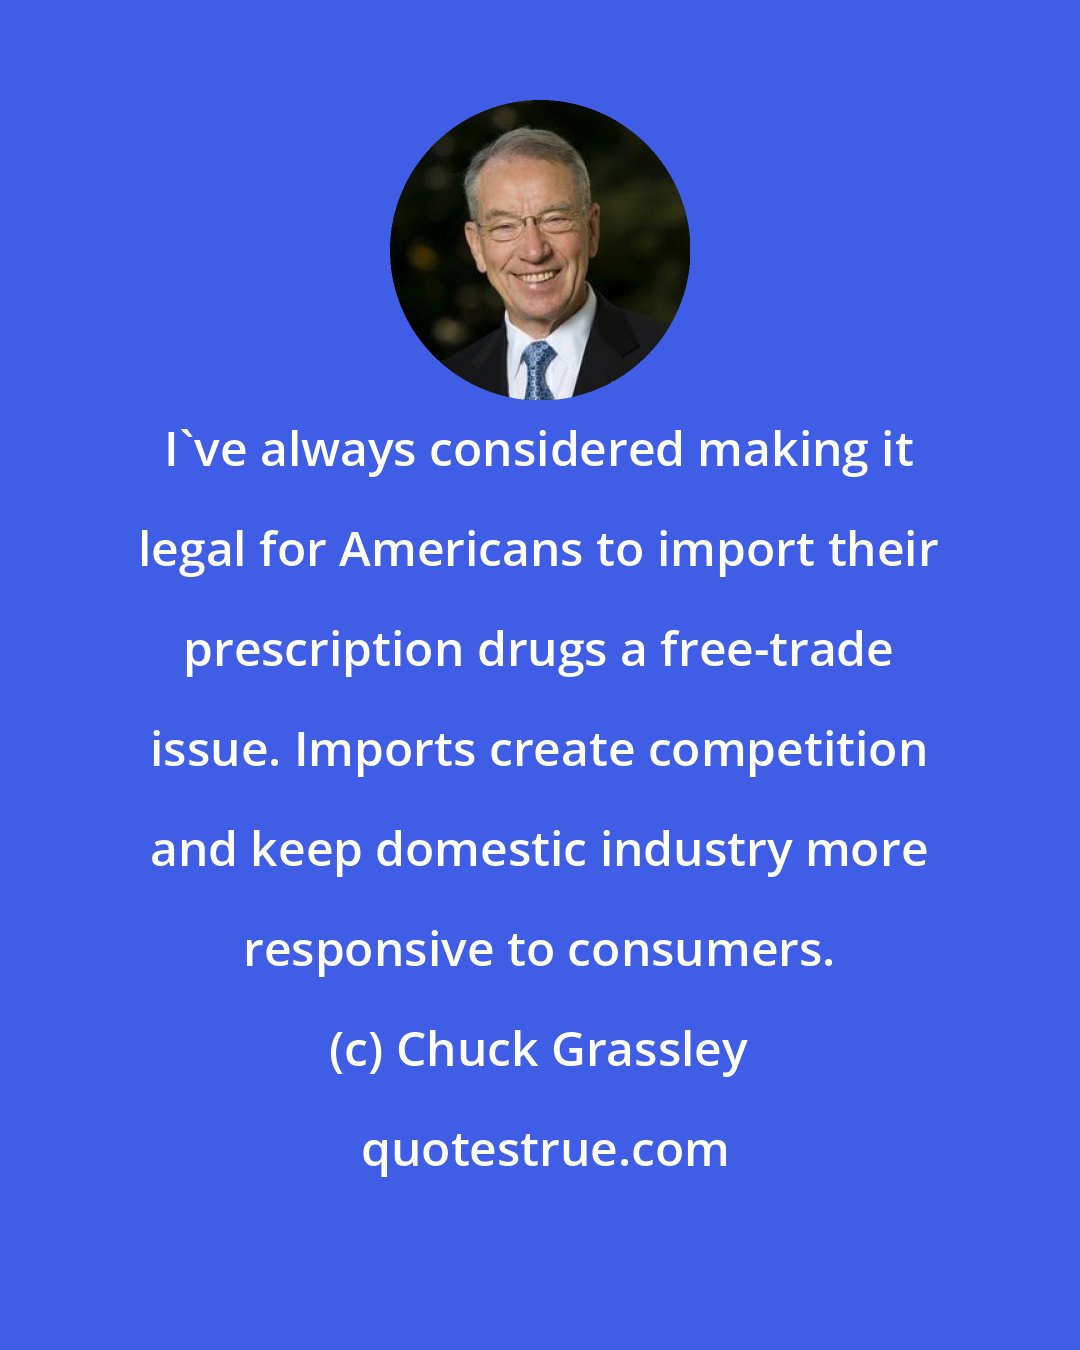 Chuck Grassley: I've always considered making it legal for Americans to import their prescription drugs a free-trade issue. Imports create competition and keep domestic industry more responsive to consumers.